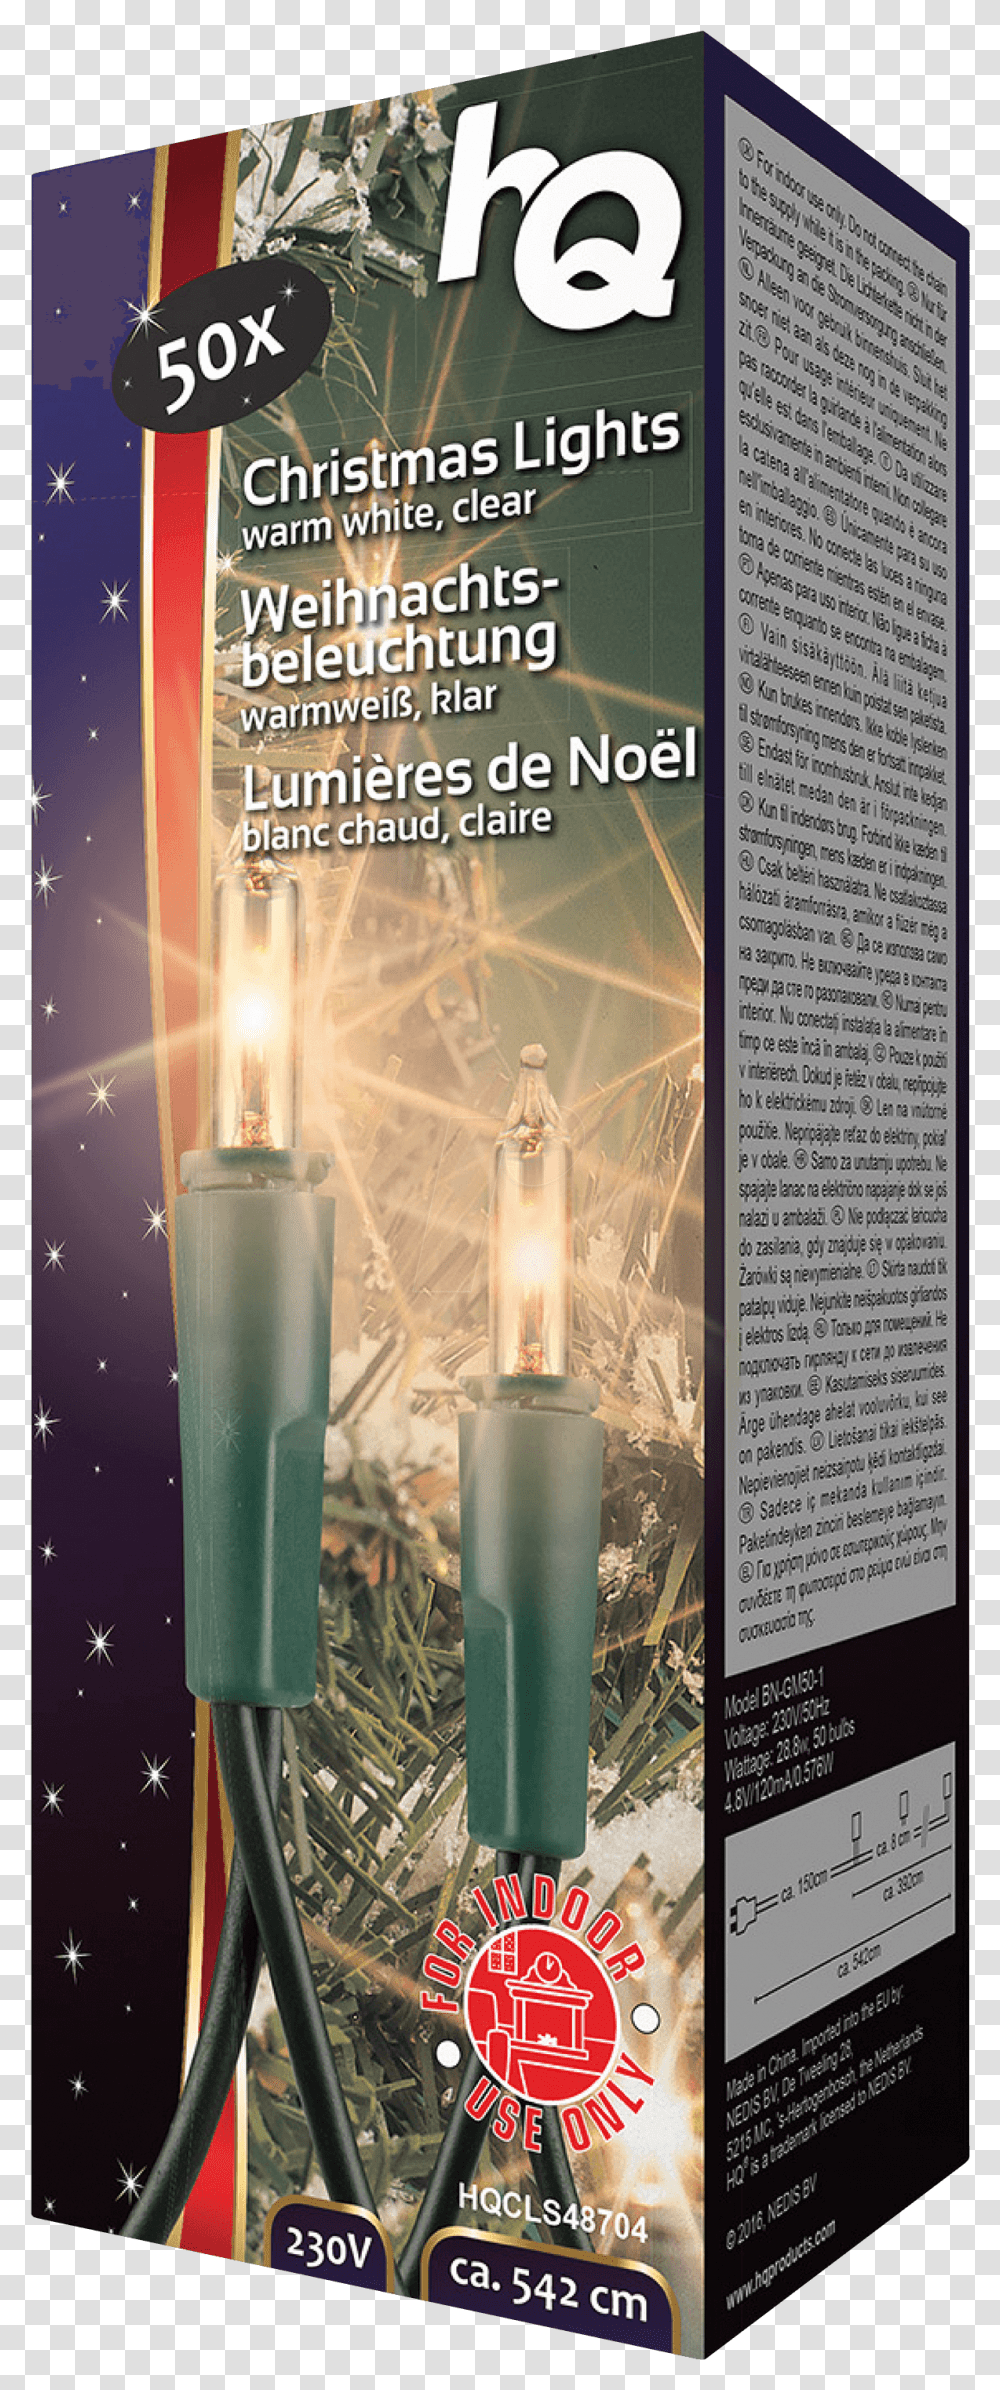 Christmas Light 50 Incandescent Hq Flyer, Candle, Paper, Fire, Poster Transparent Png